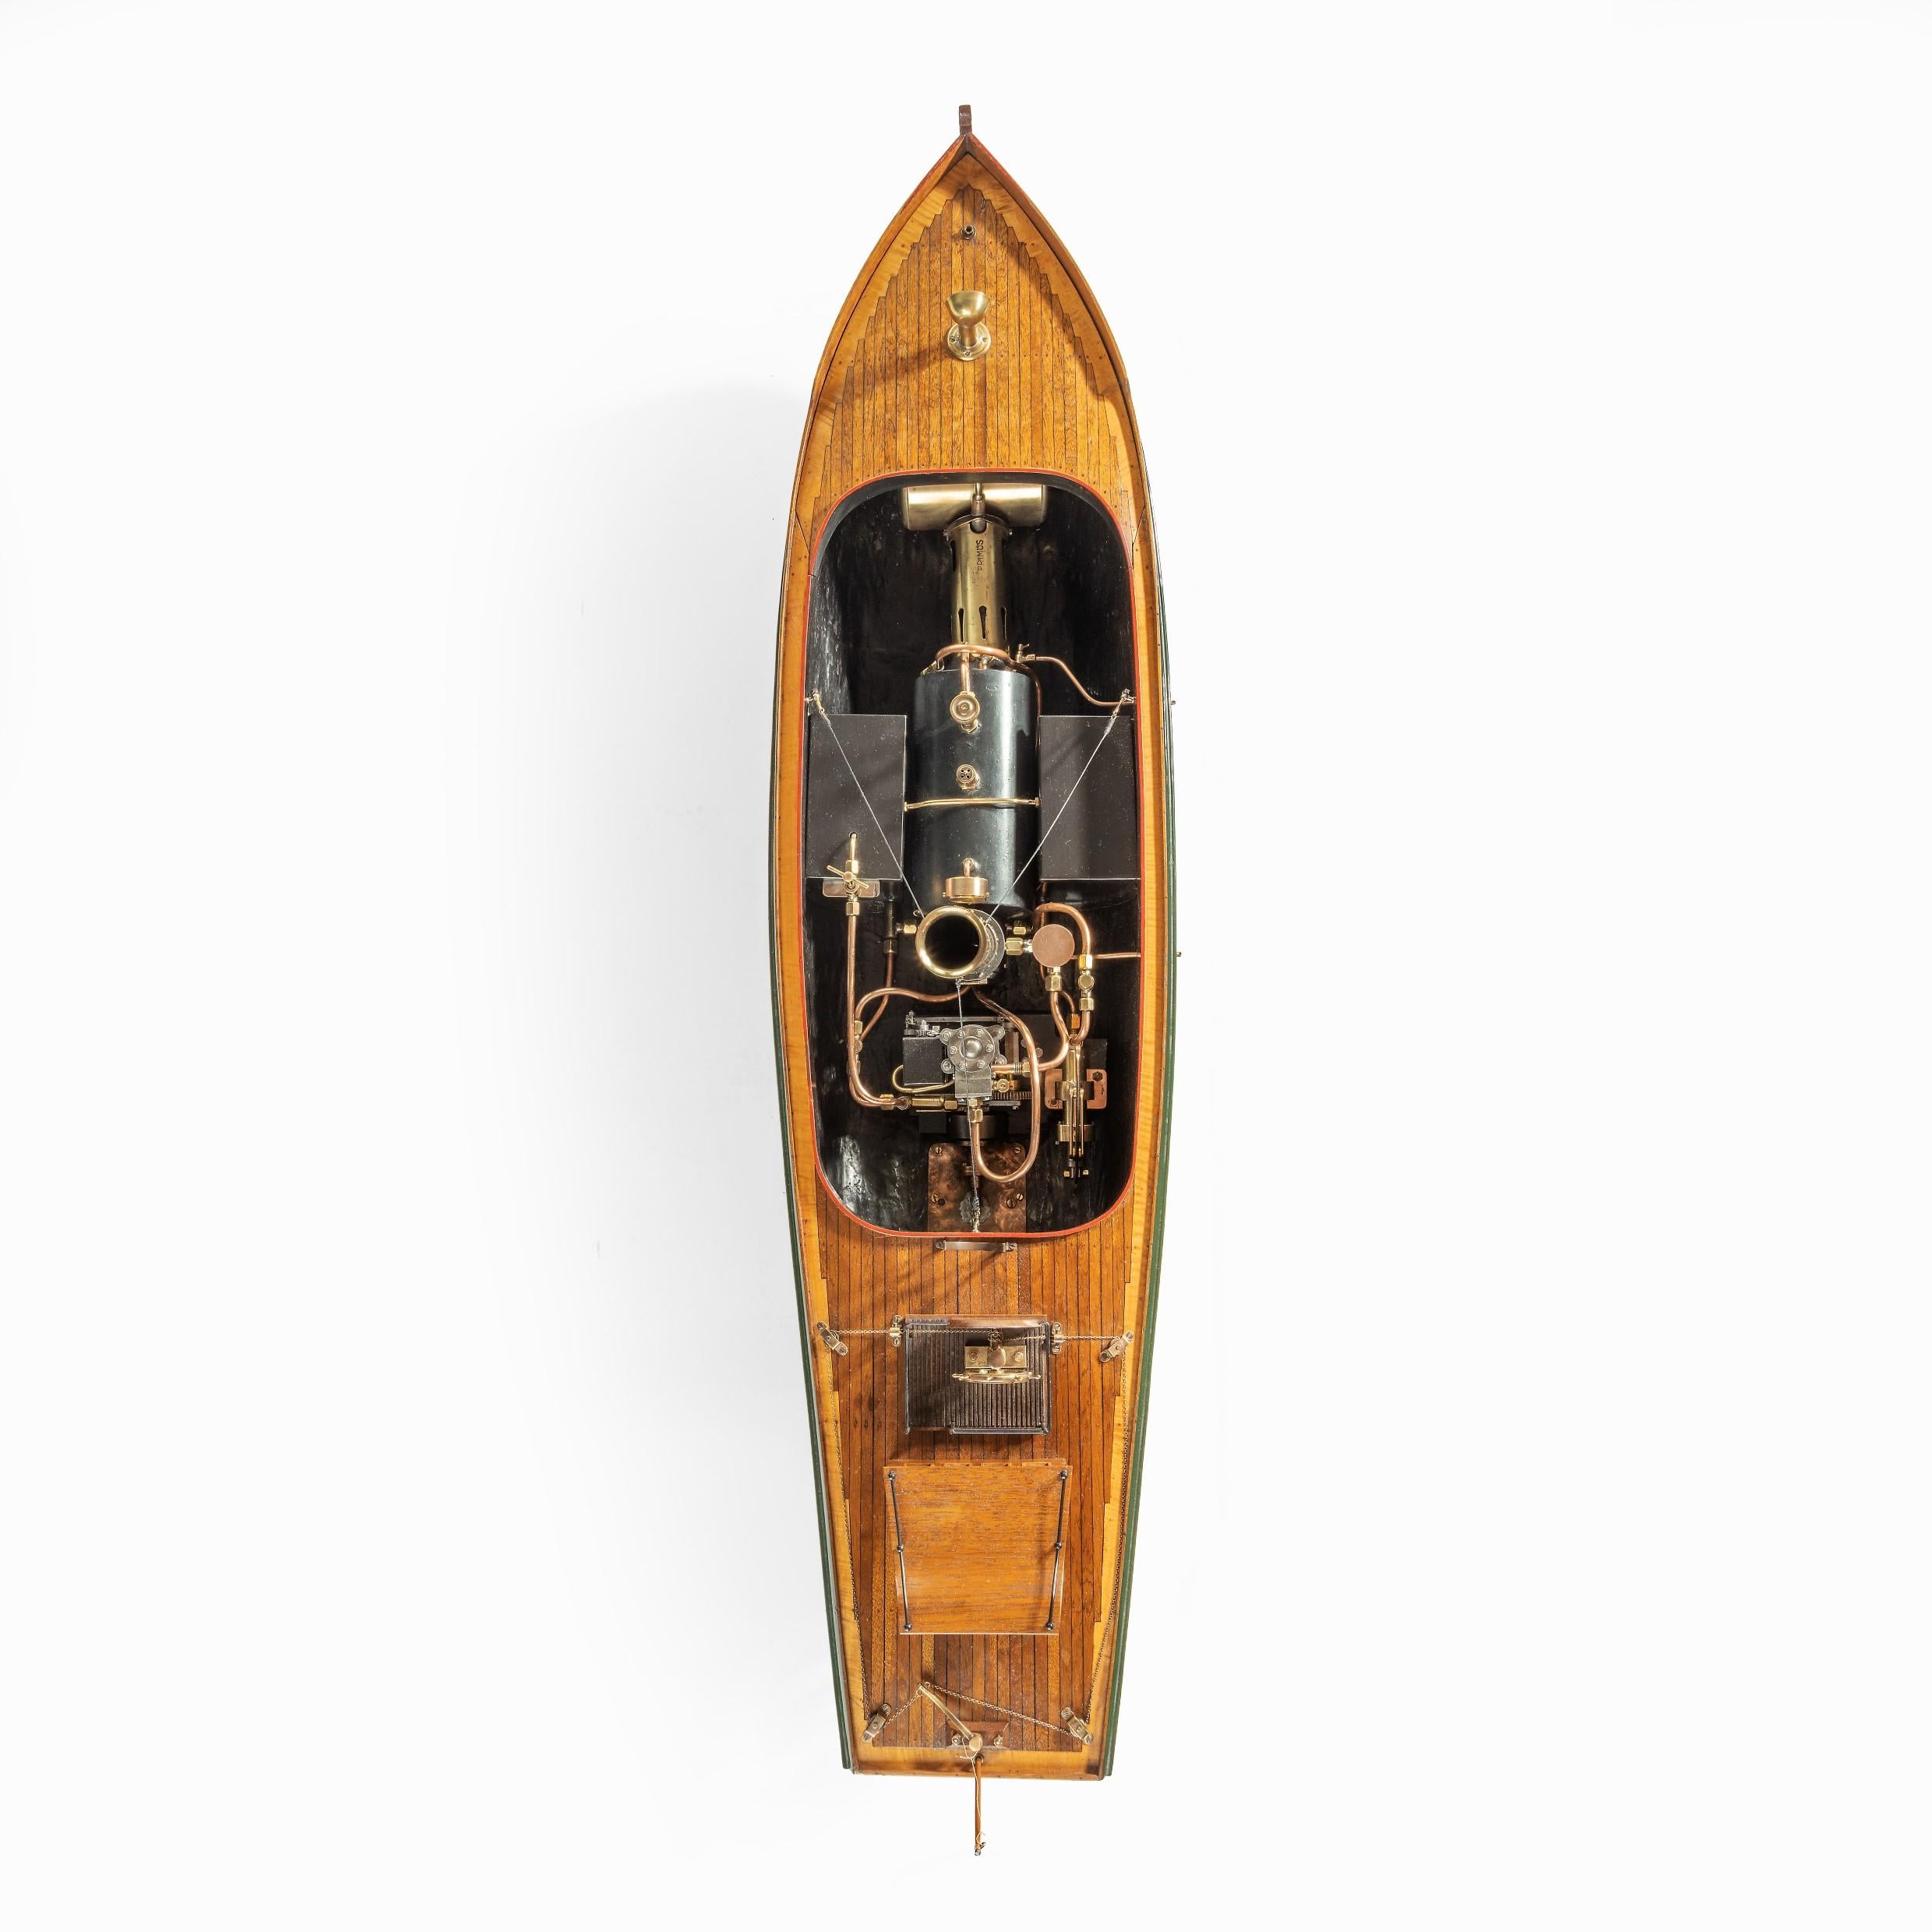 This owner’s model of a steam launch is painted with green topsides and a red bottom, and has planked and pinned mahogany decks with fiddleback maple thwarts. The decks have many authentic details including a mahogany coach house and brass funnel.